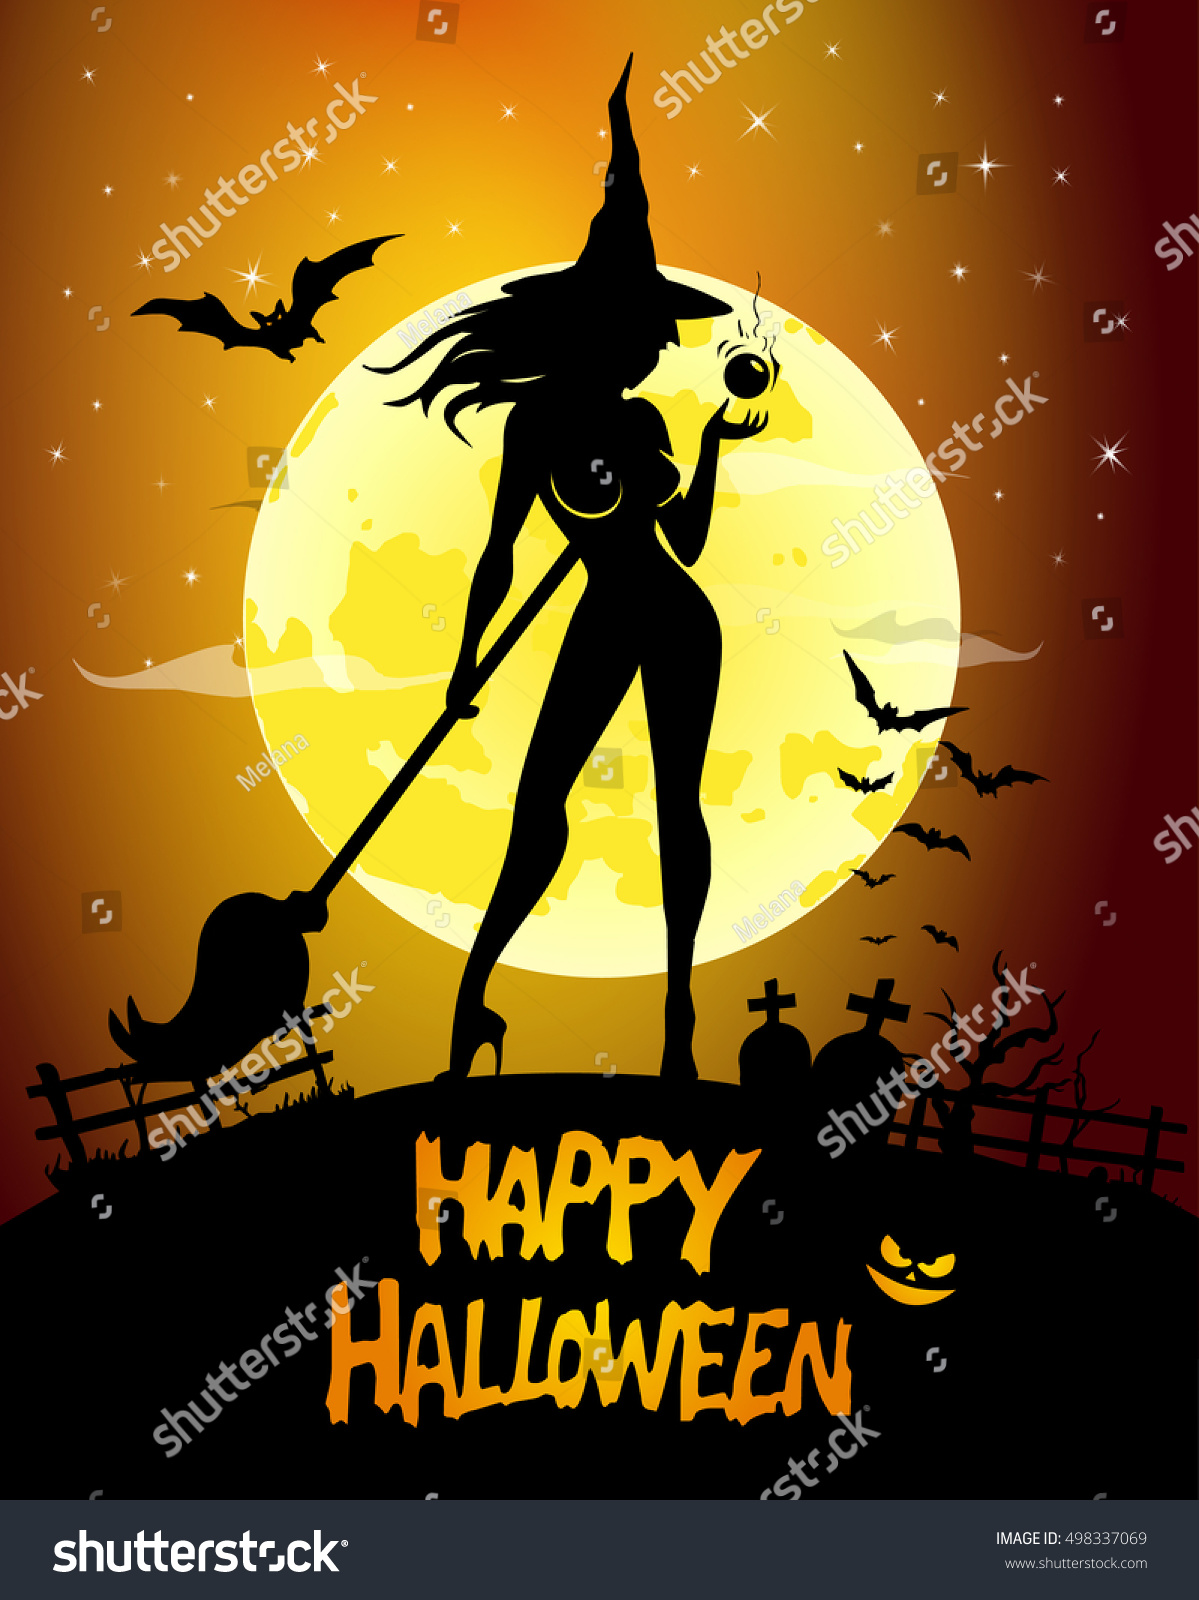 Halloween Sexy Witch Vector Illustration Stock Vector 498337069 Shutterstock